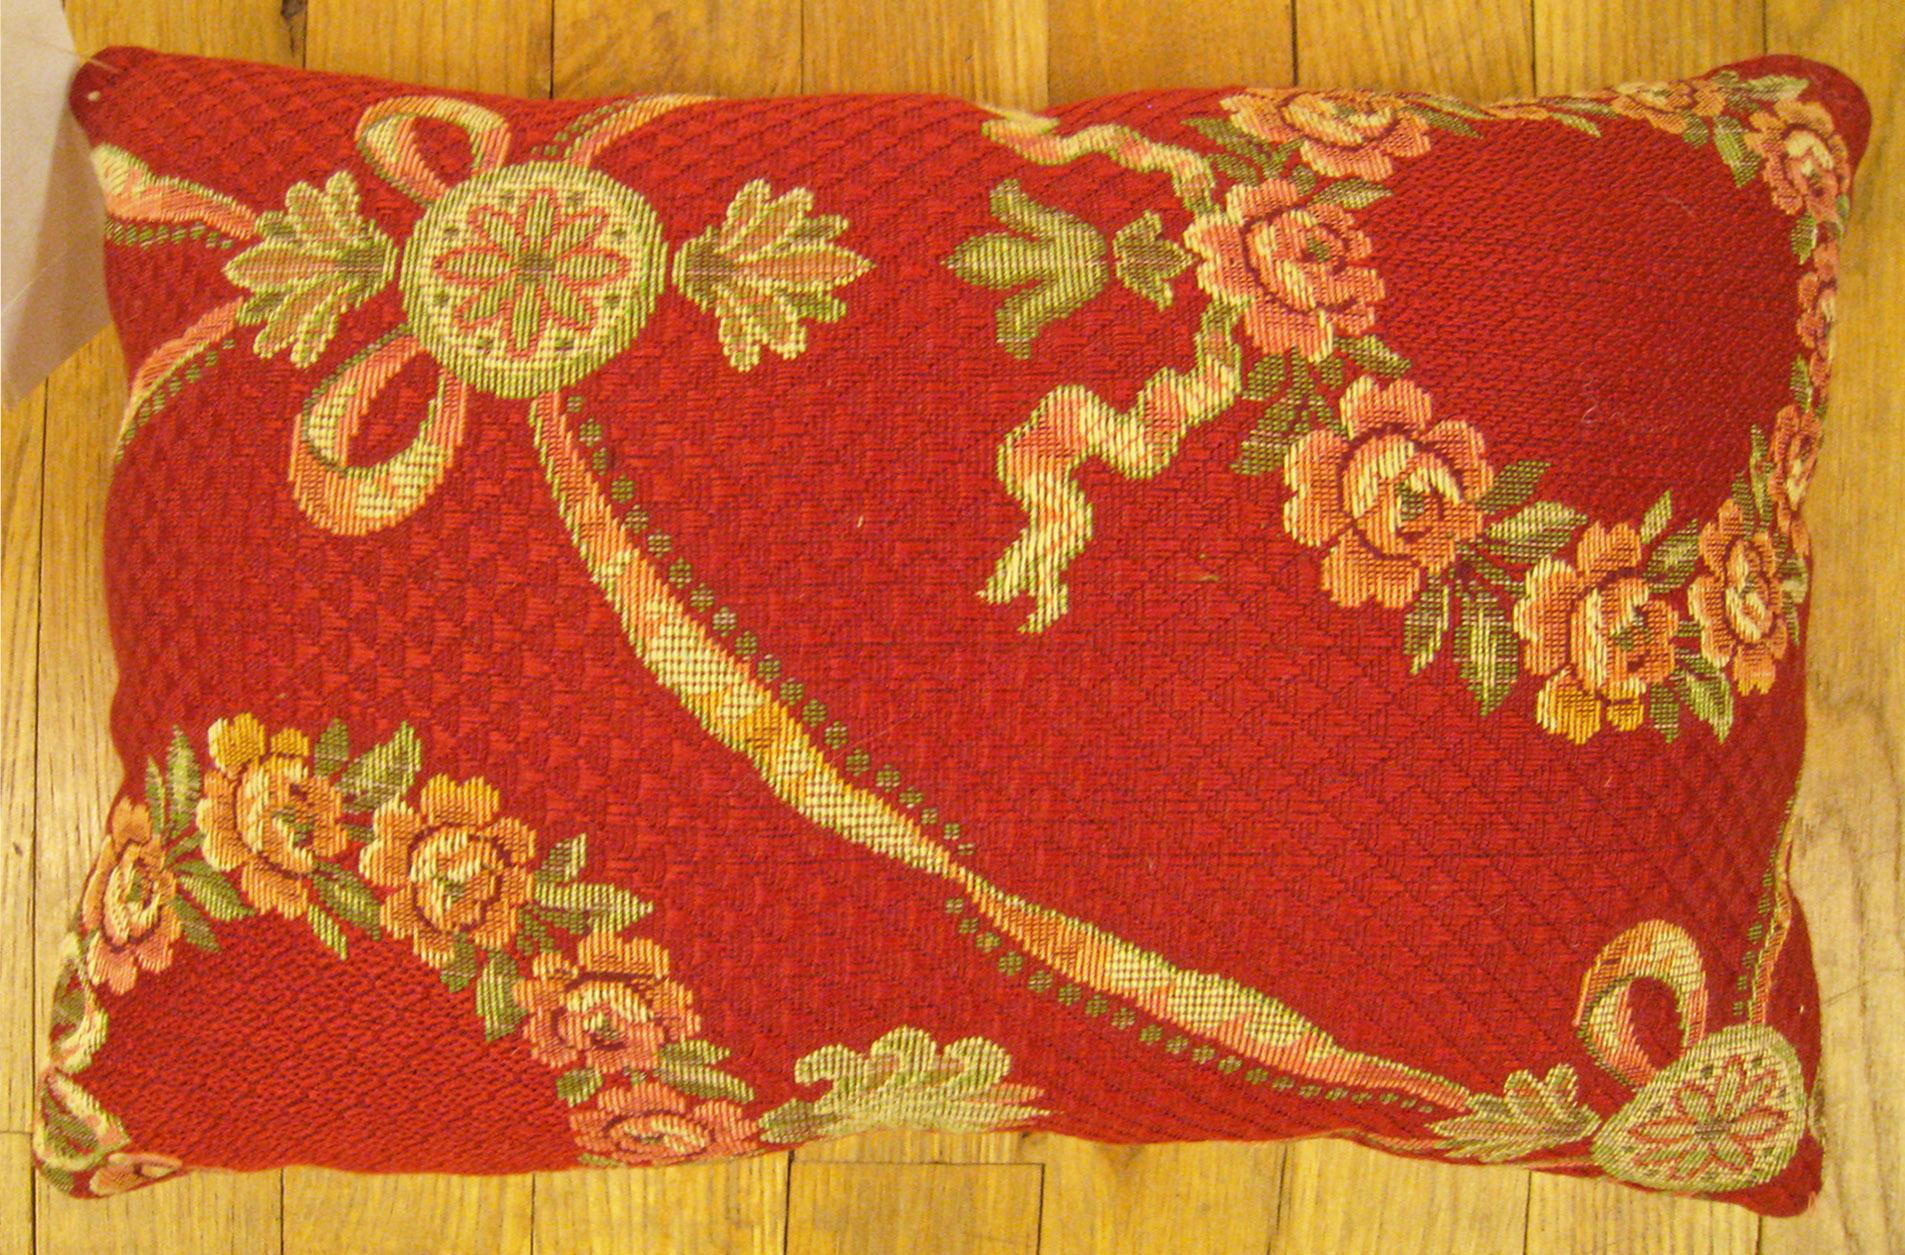 Antique Jacquard Tapestry pillow; size 1'0” x 1'3”.

An antique decorative pillow with floral elements allover a red central field, size 1'0